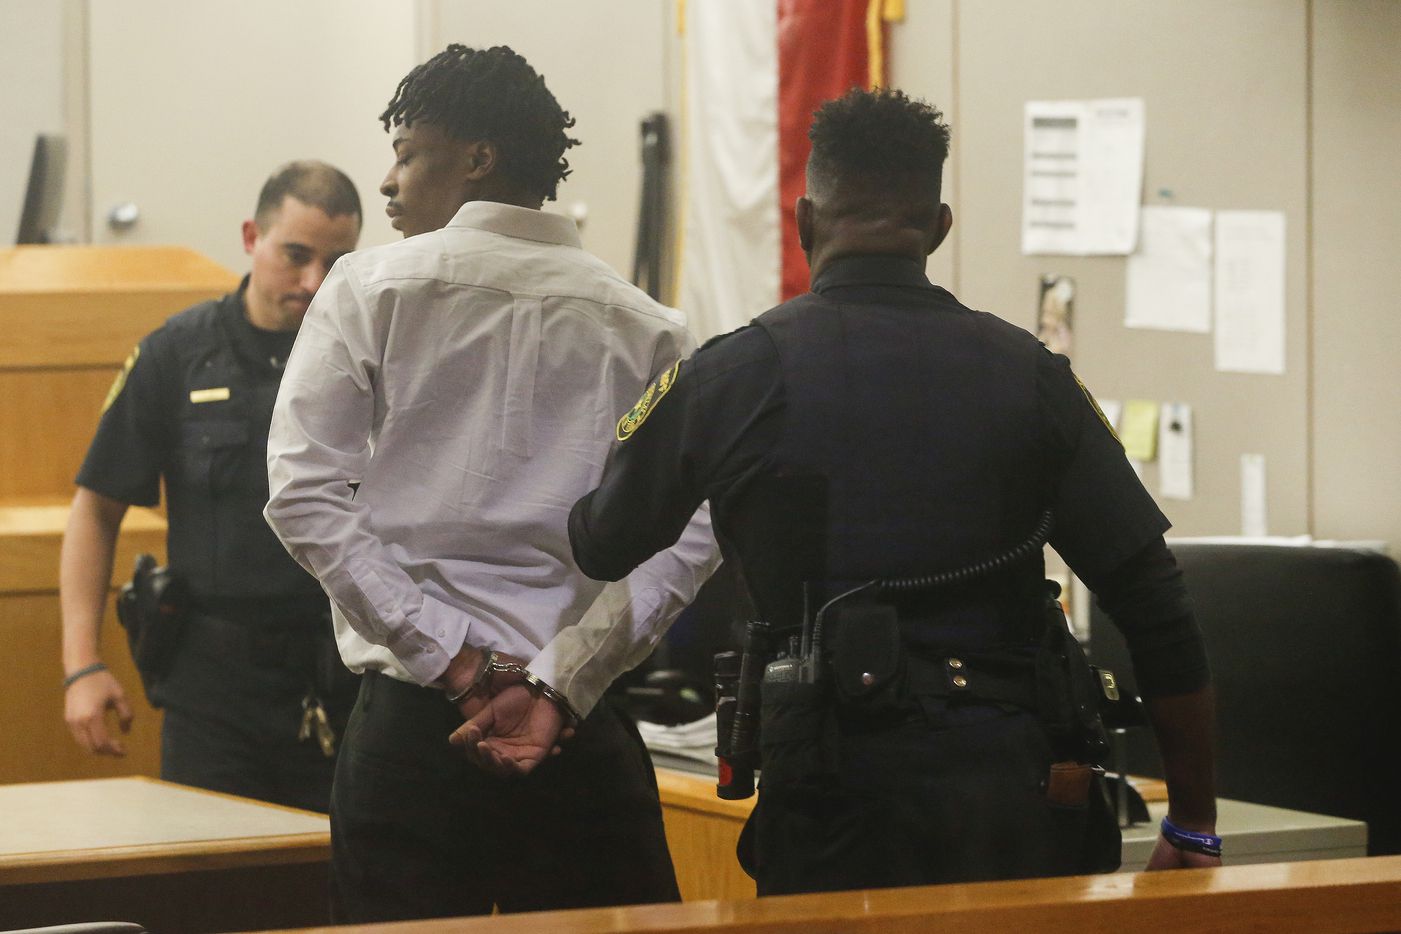 Desmond Jones stands as he is sentenced to 99 years in prison for engaging in organized criminal activity. (Ryan Michalesko/The Dallas Morning News)